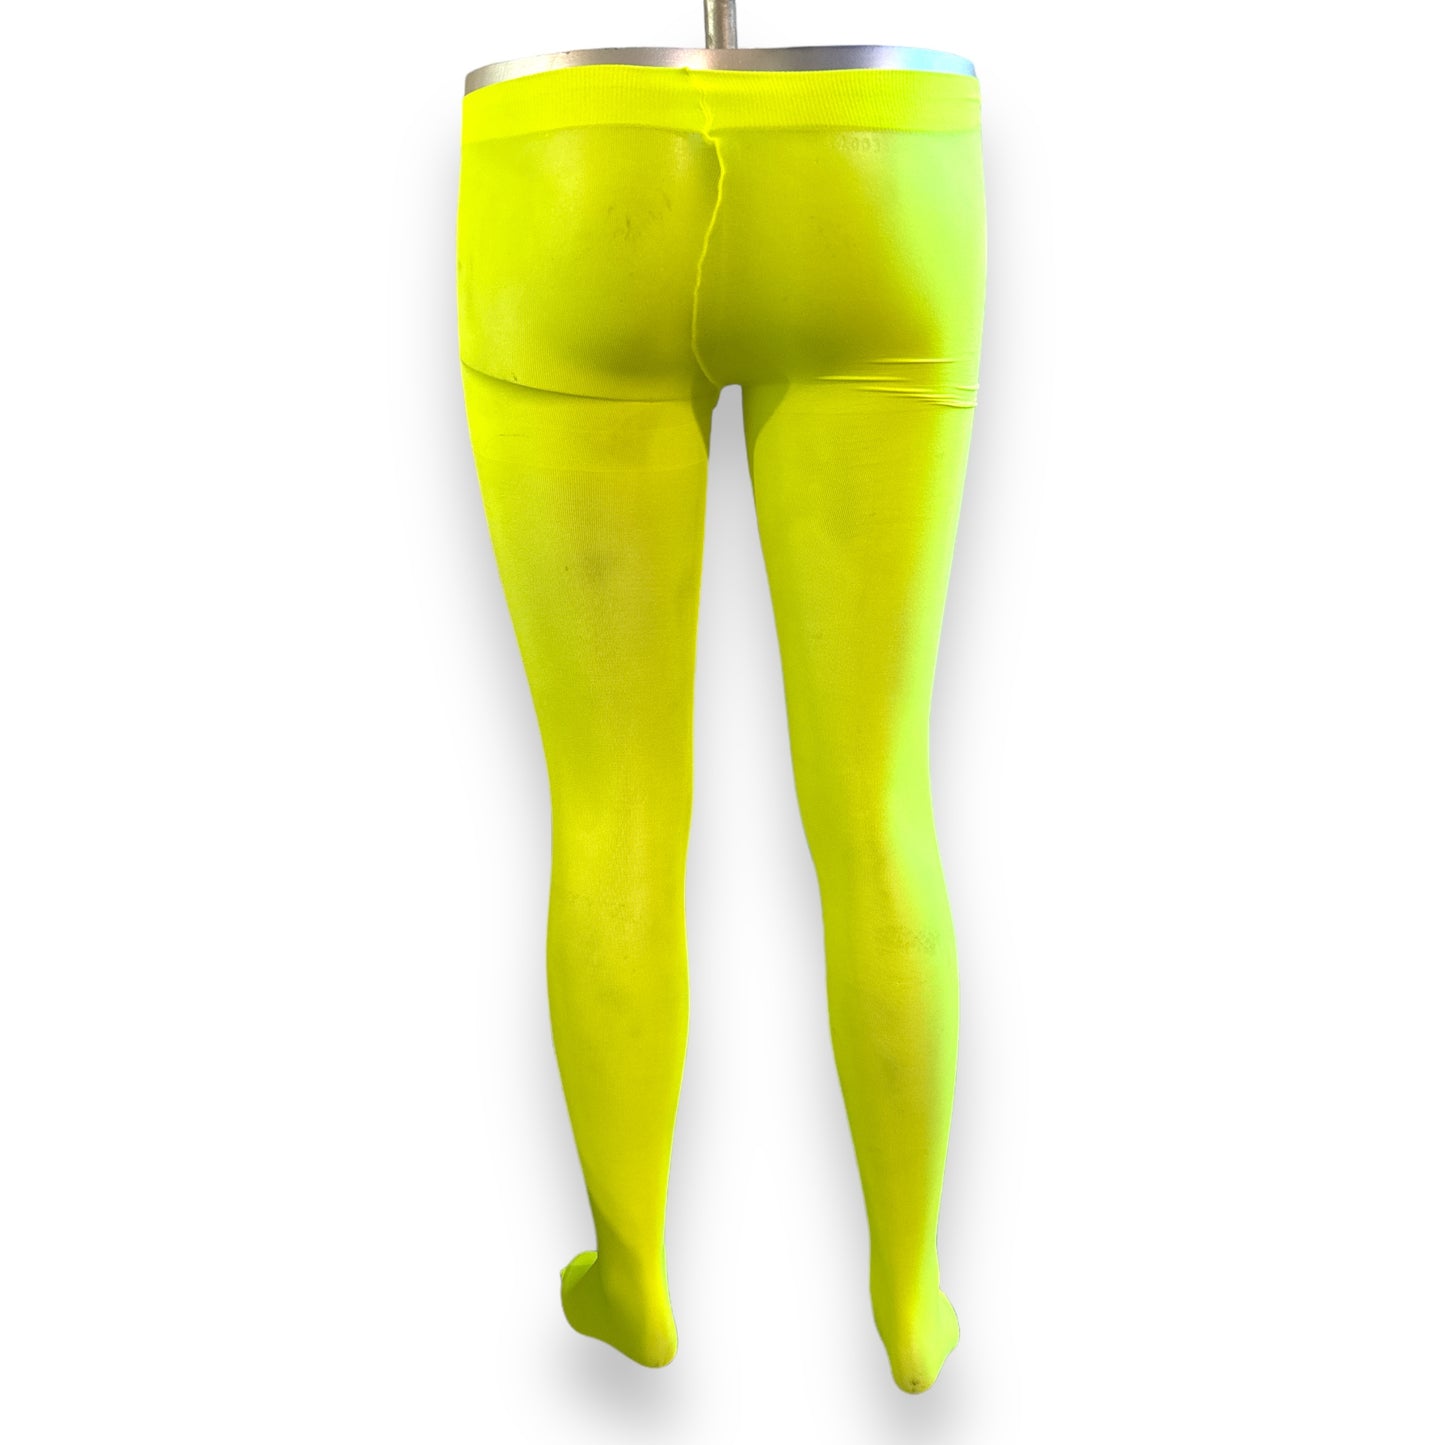 Kinky Pleasure - MP051 - Leggings In Neon Yellow - Available in 2 Sizes